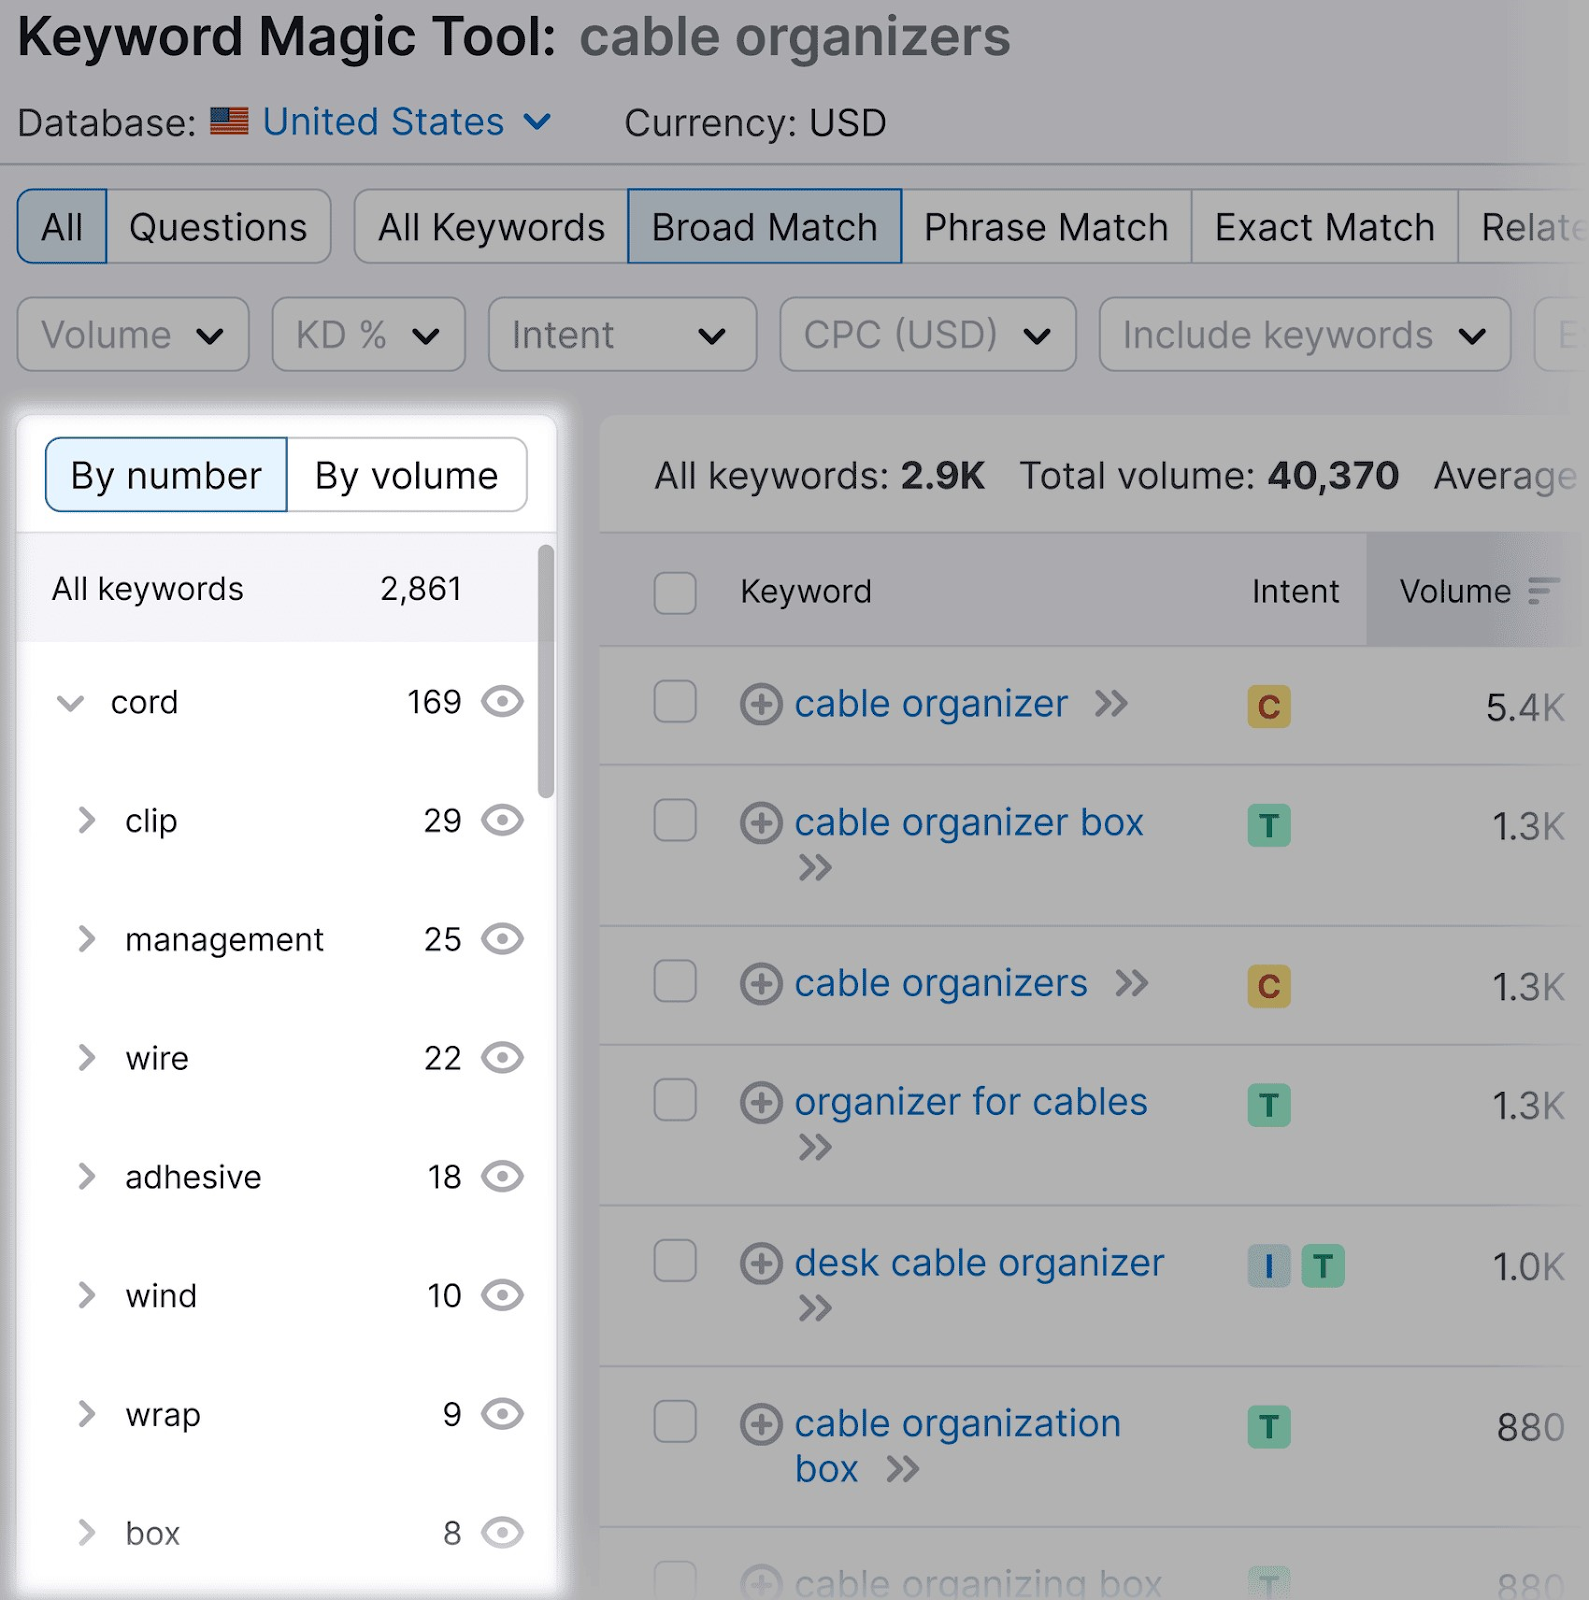 Groups And Subgroups Highlighted For &Quot;Cable Organizers&Quot; In Keyword Magic Tool